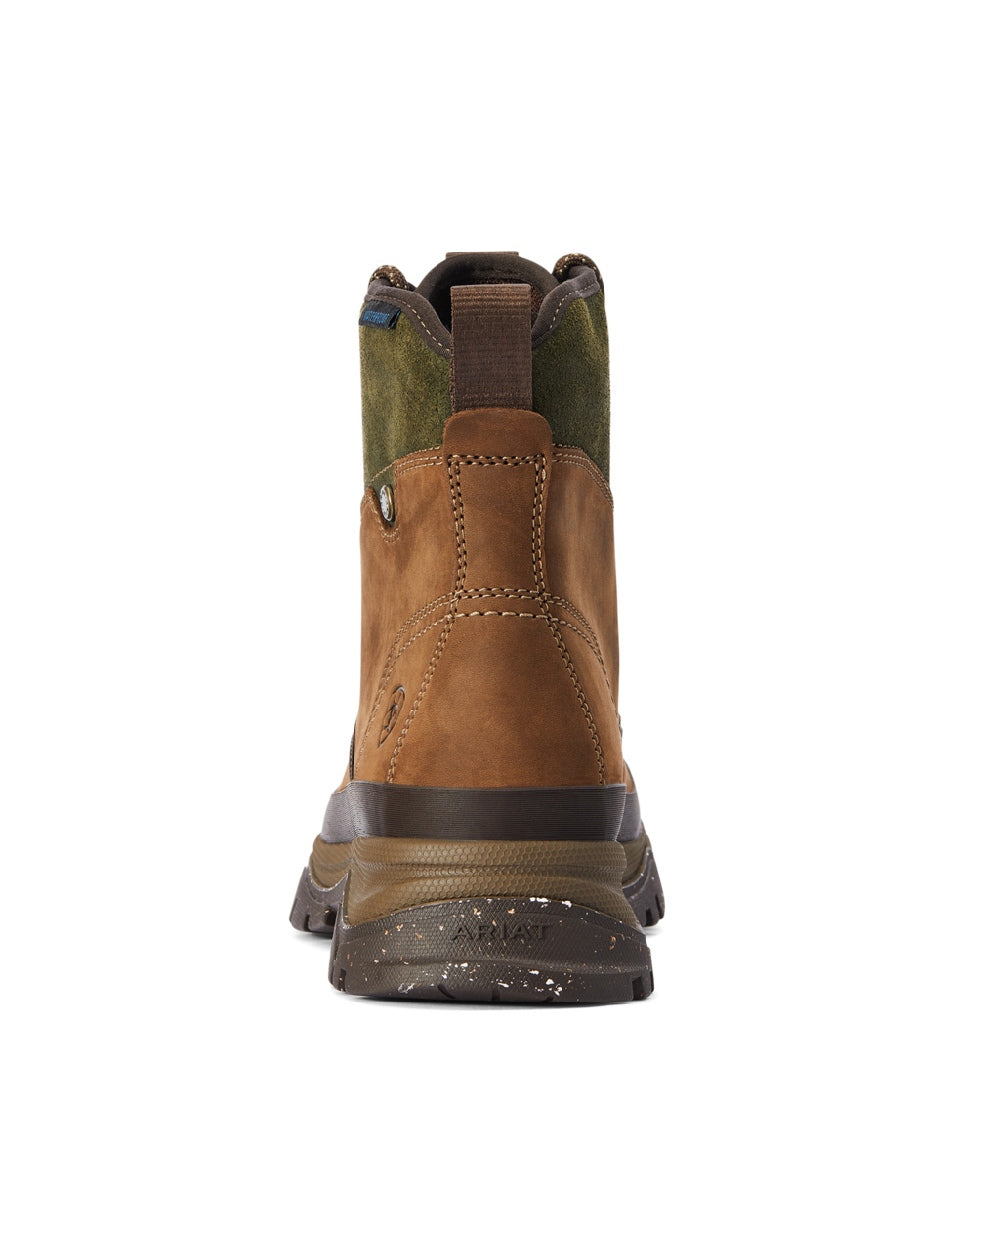 Ariat Womens Moresby Waterproof Boots in Oily Distressed Brown/Olive 